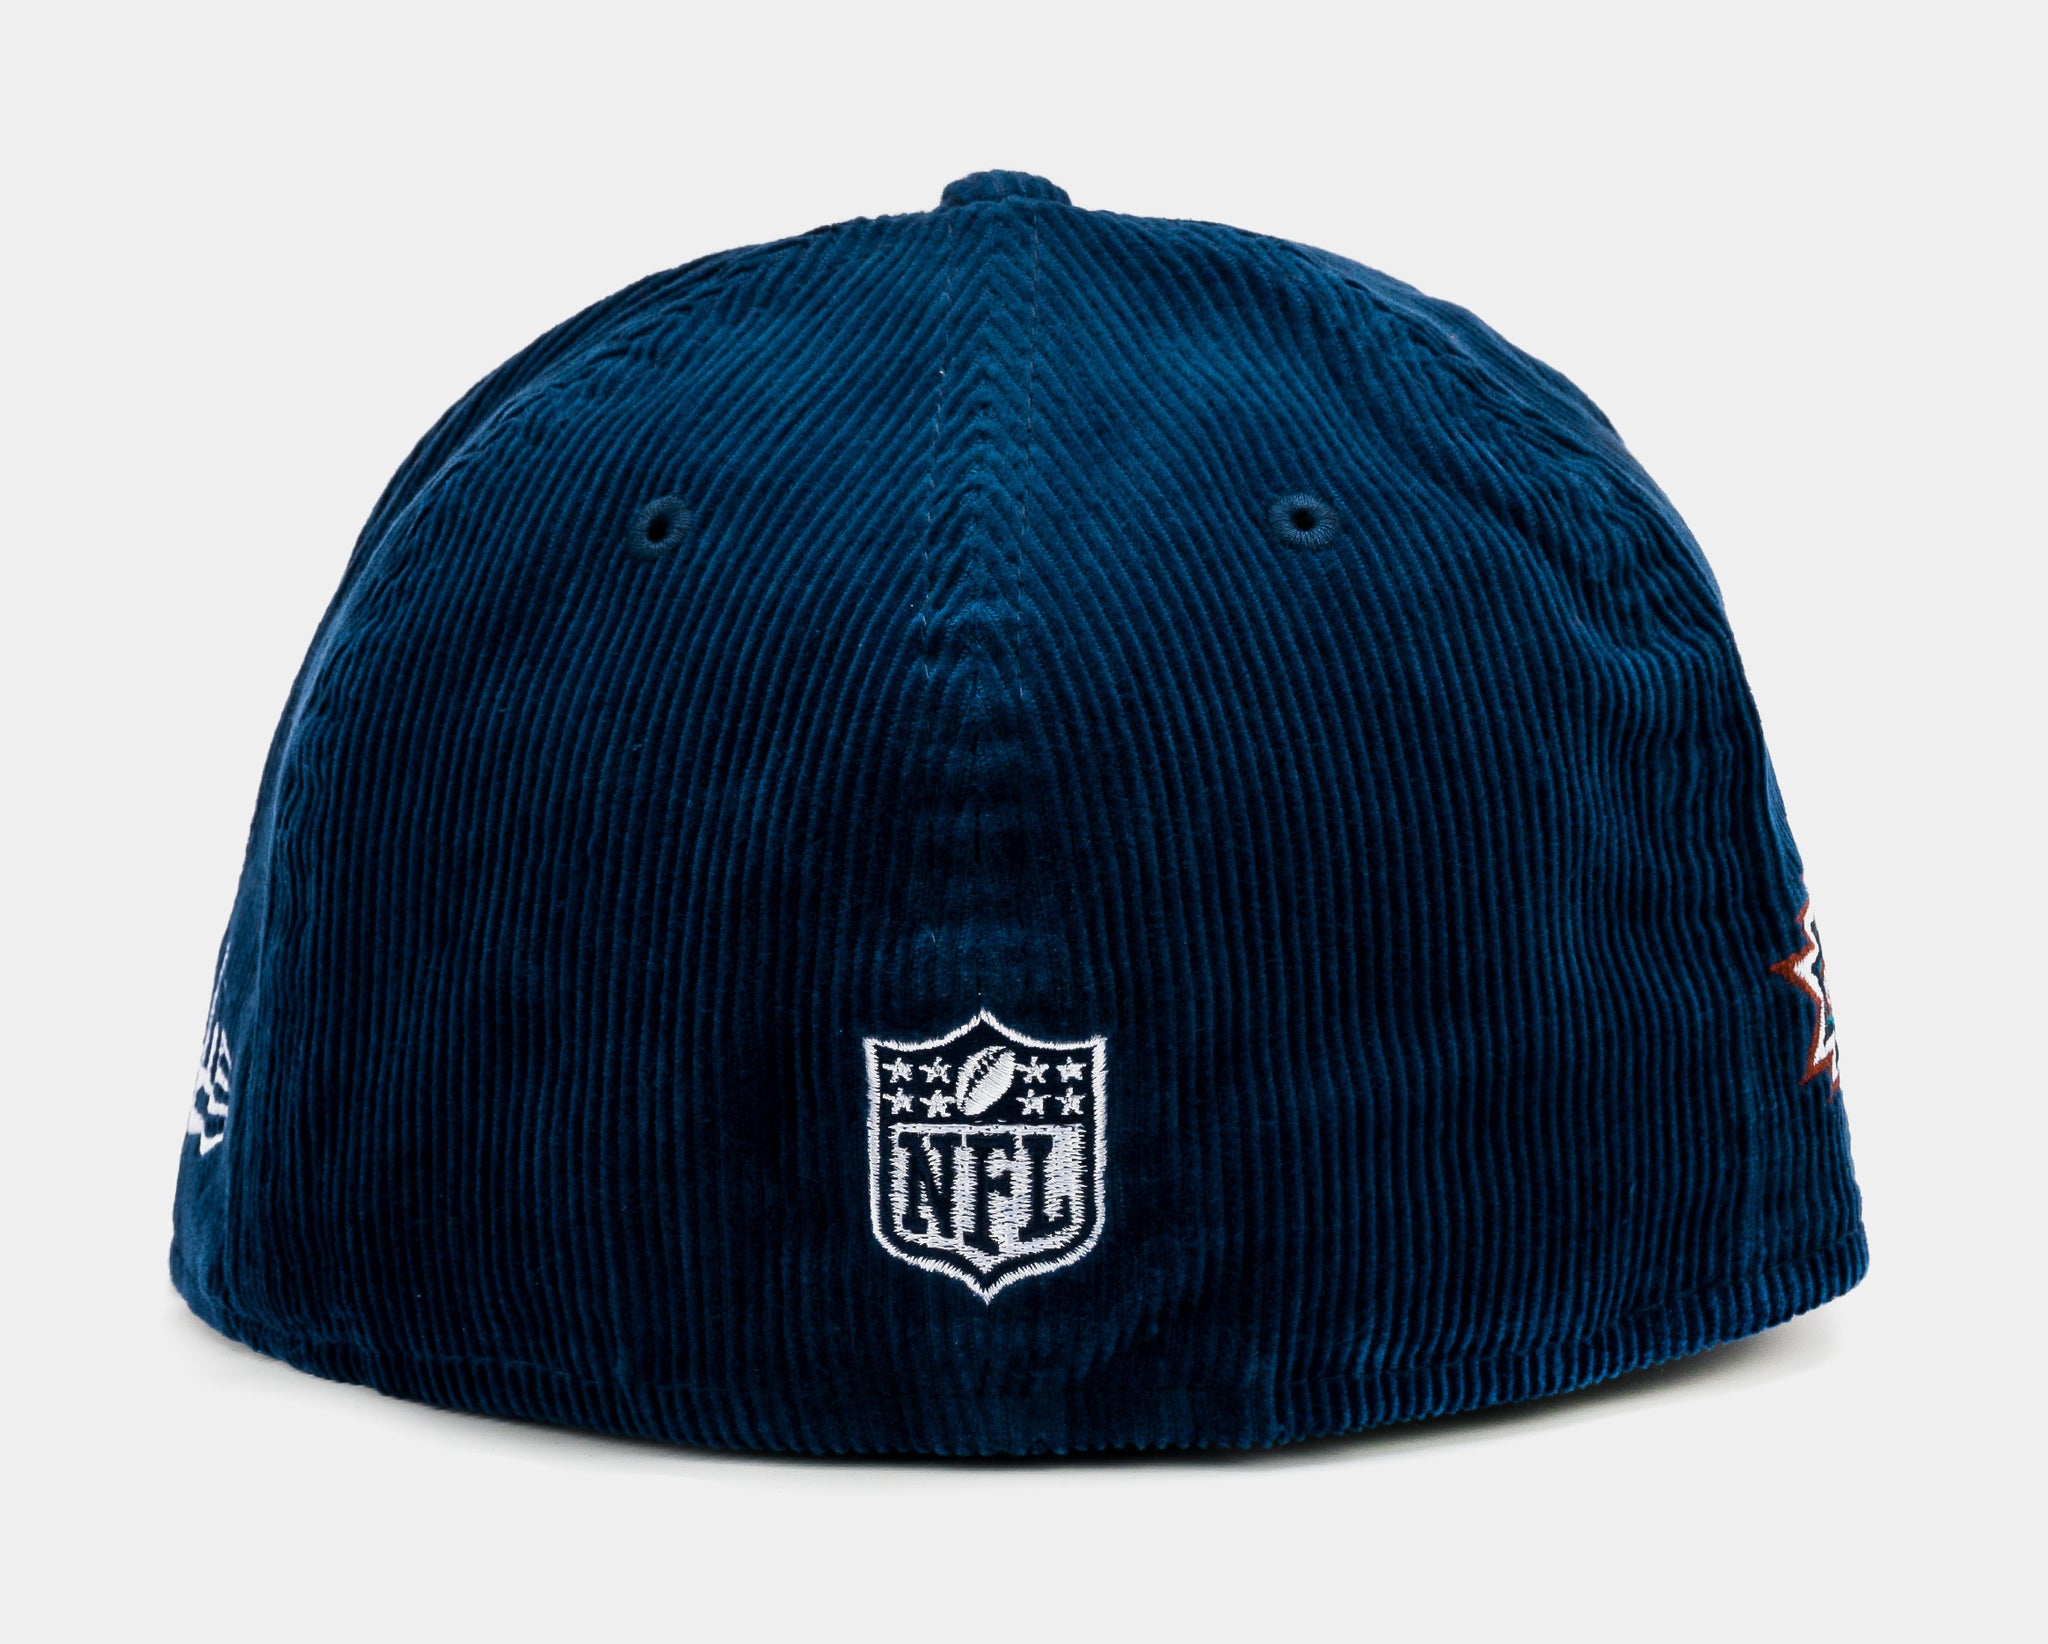 Dallas Cowboys New Era 59FIFTY Fitted Hat - Navy